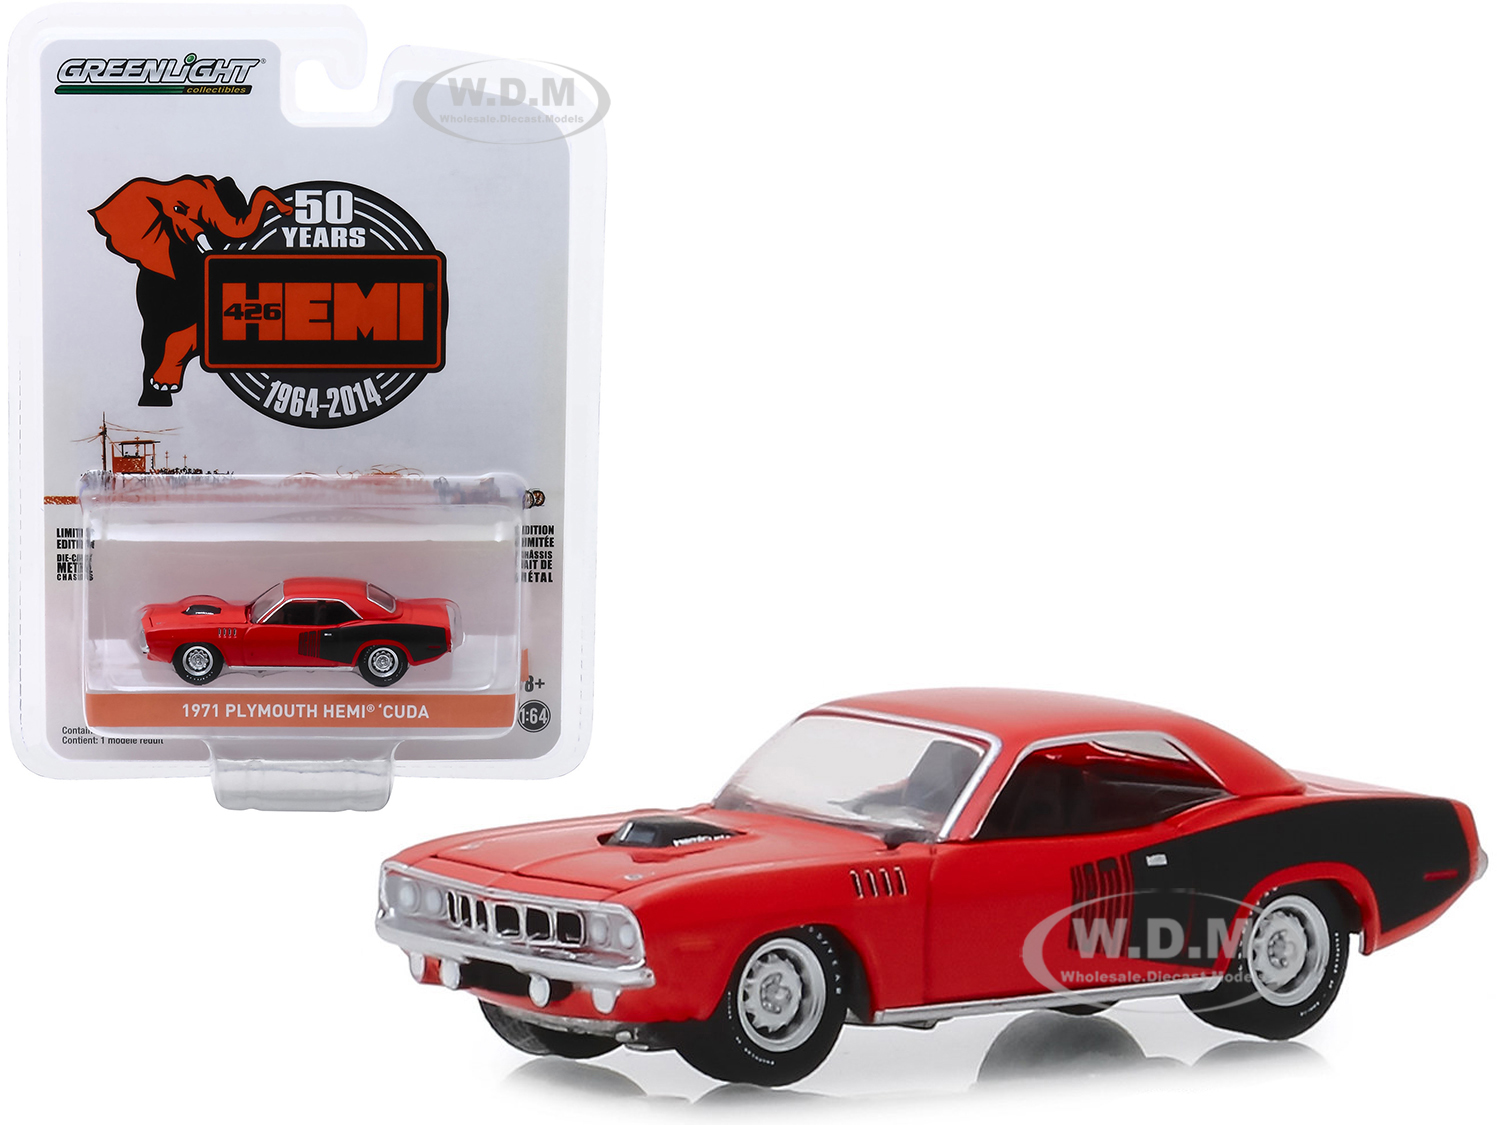 1971 Plymouth Hemi Barracuda Red With Black Stripes "426 Hemi 50 Years" (1964-2014) "anniversary Collection" Series 9 1/64 Diecast Model Car By Green